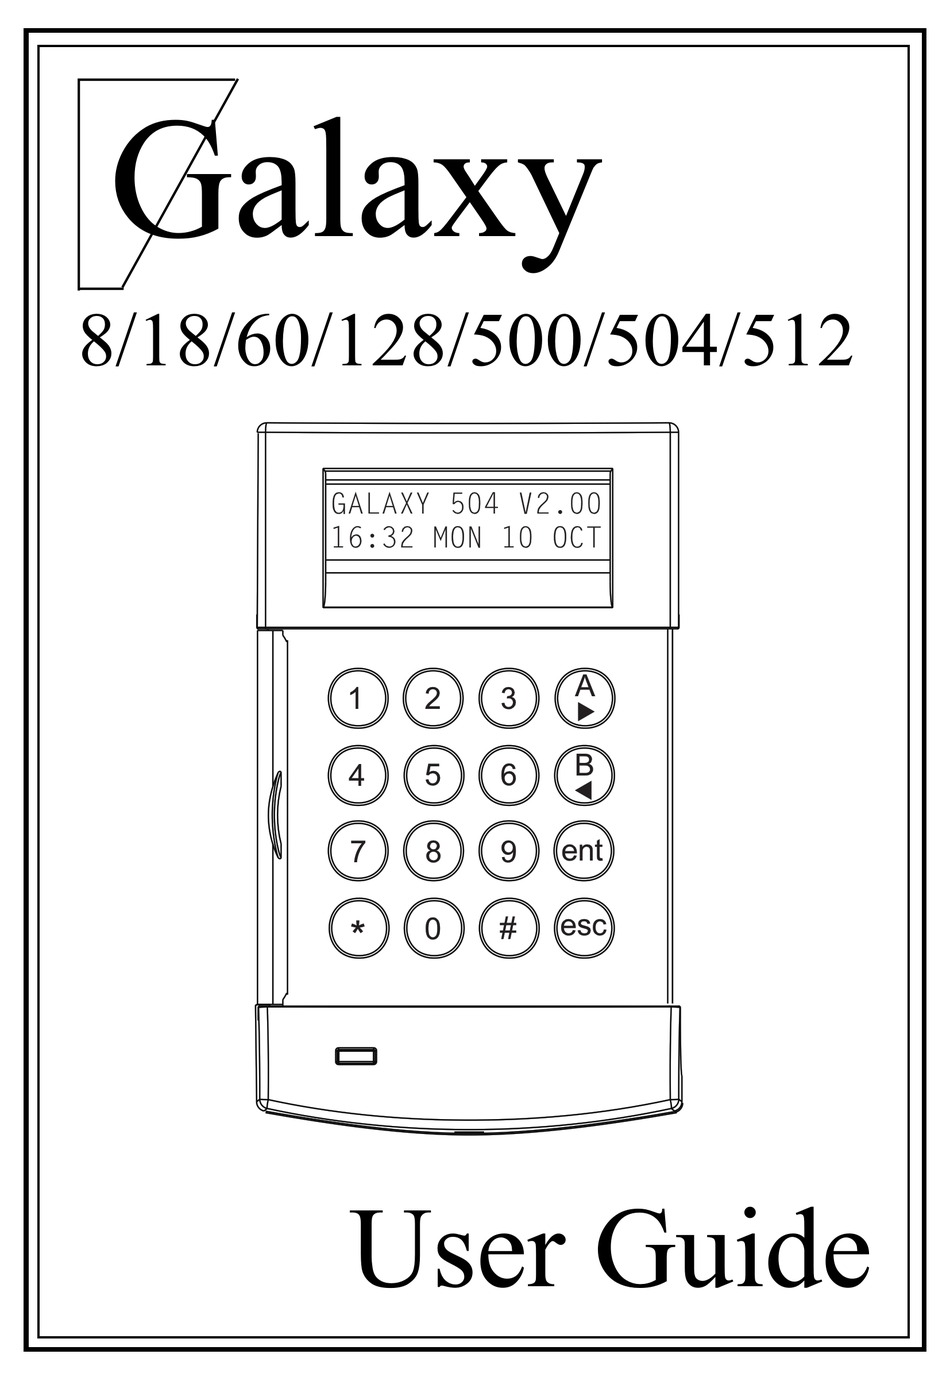 how to change the alarm code on a honeywell galaxy panel